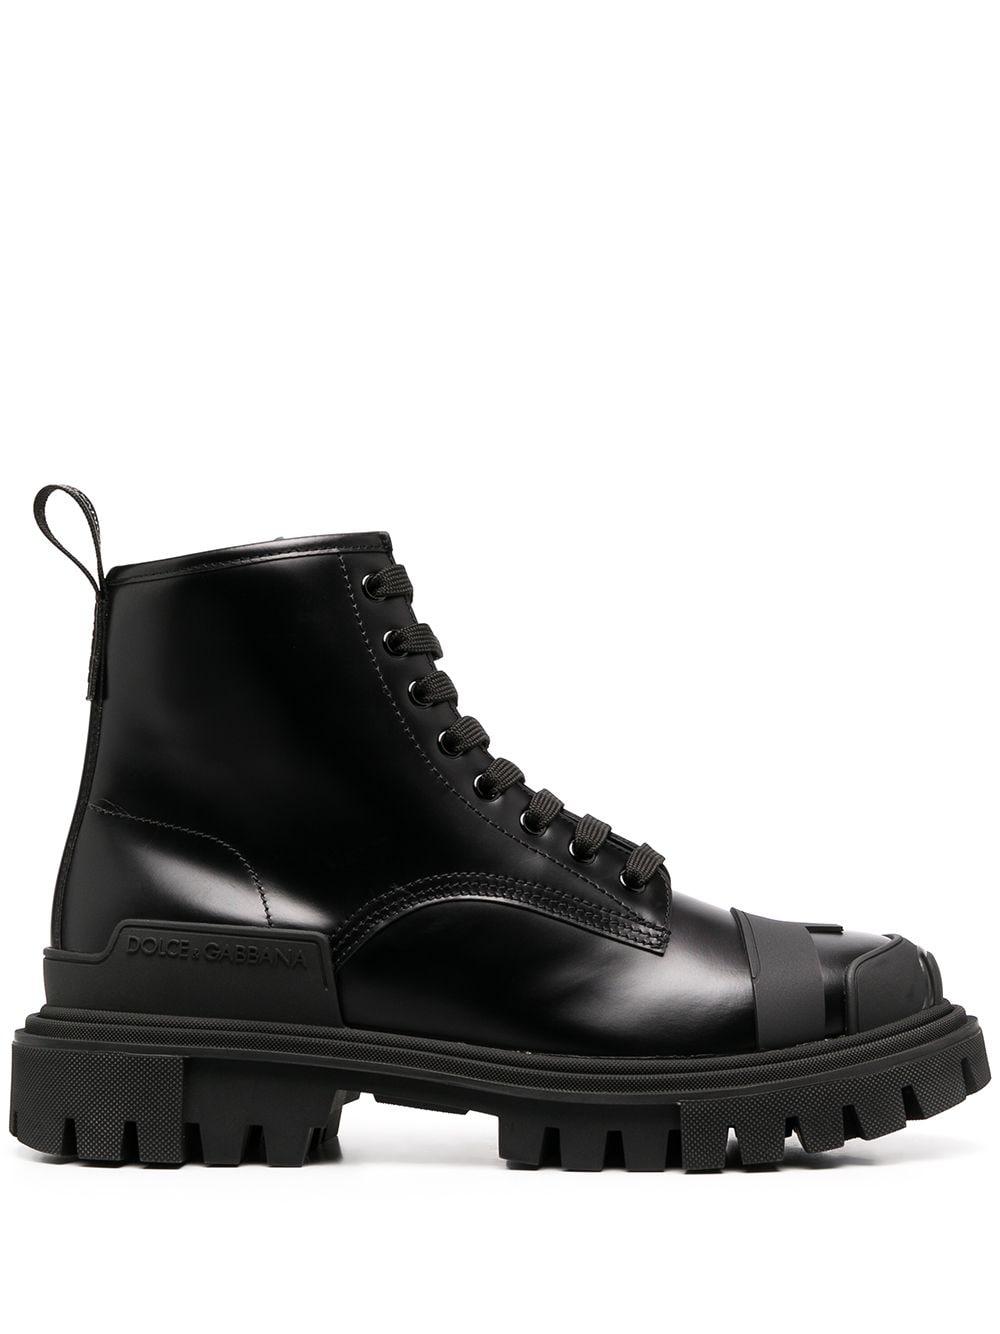 Dolce & Gabbana Leather Chunky Trekking Boots in Black for Men - Lyst